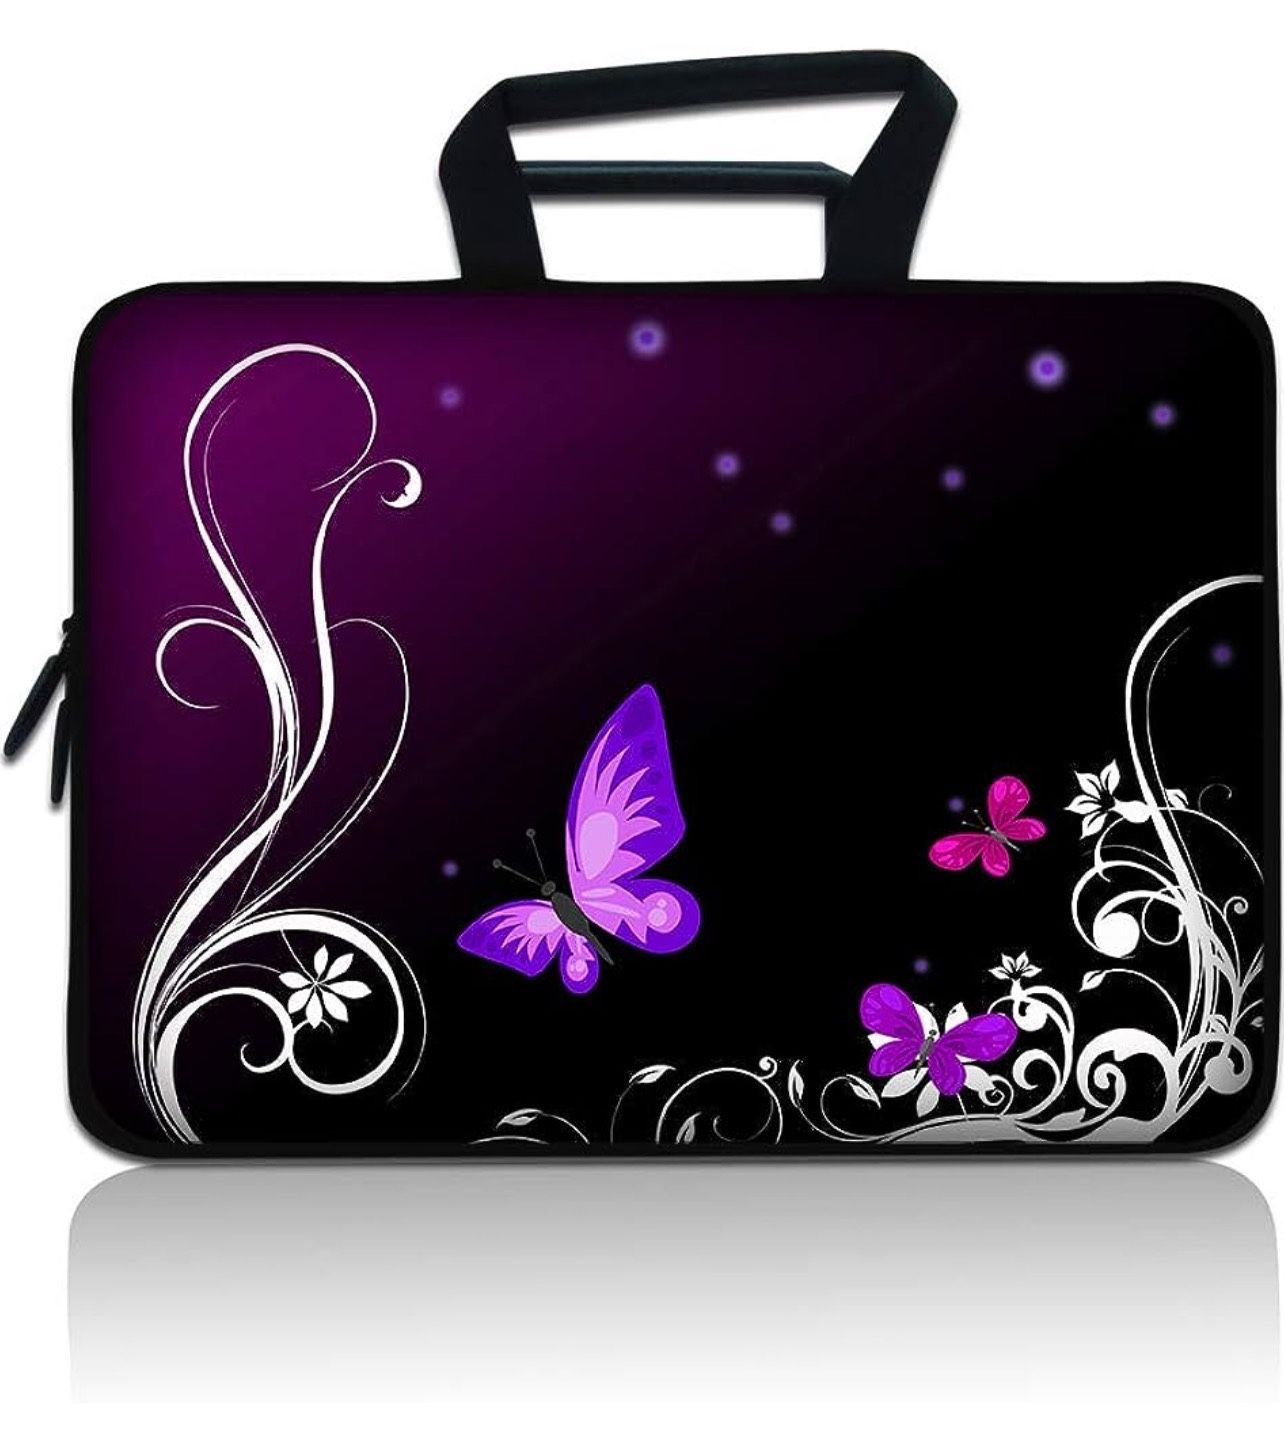 Laptop Sleeve 15 inchNeoprene Protector Bag Ultrabook Notebook Chromebook Computers Carrying Case Cover for 15.6 15" MacBook Pro HP Dell Acer A